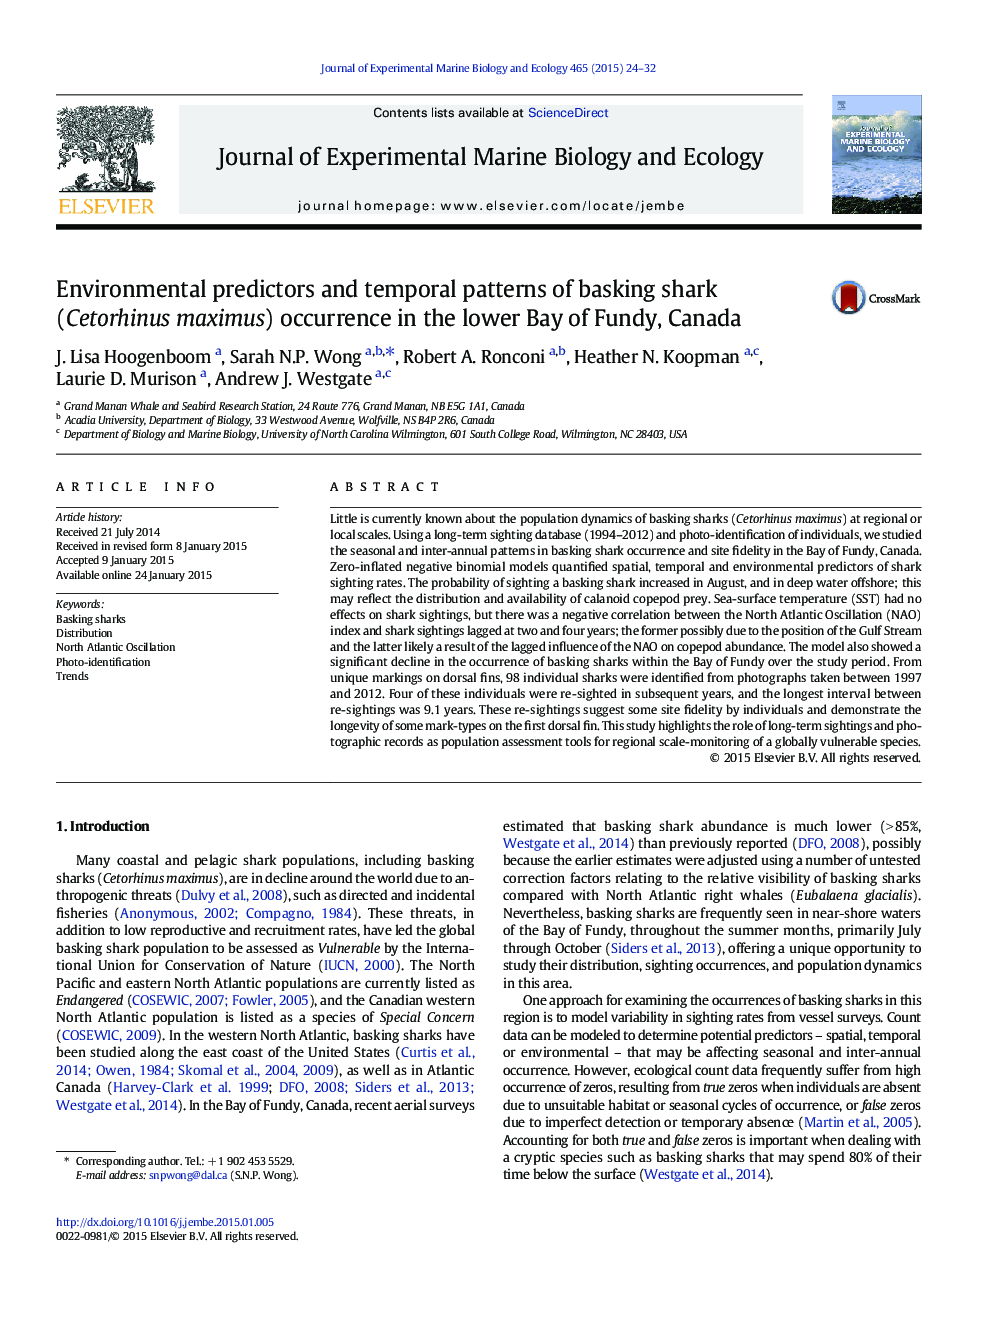 Environmental predictors and temporal patterns of basking shark (Cetorhinus maximus) occurrence in the lower Bay of Fundy, Canada